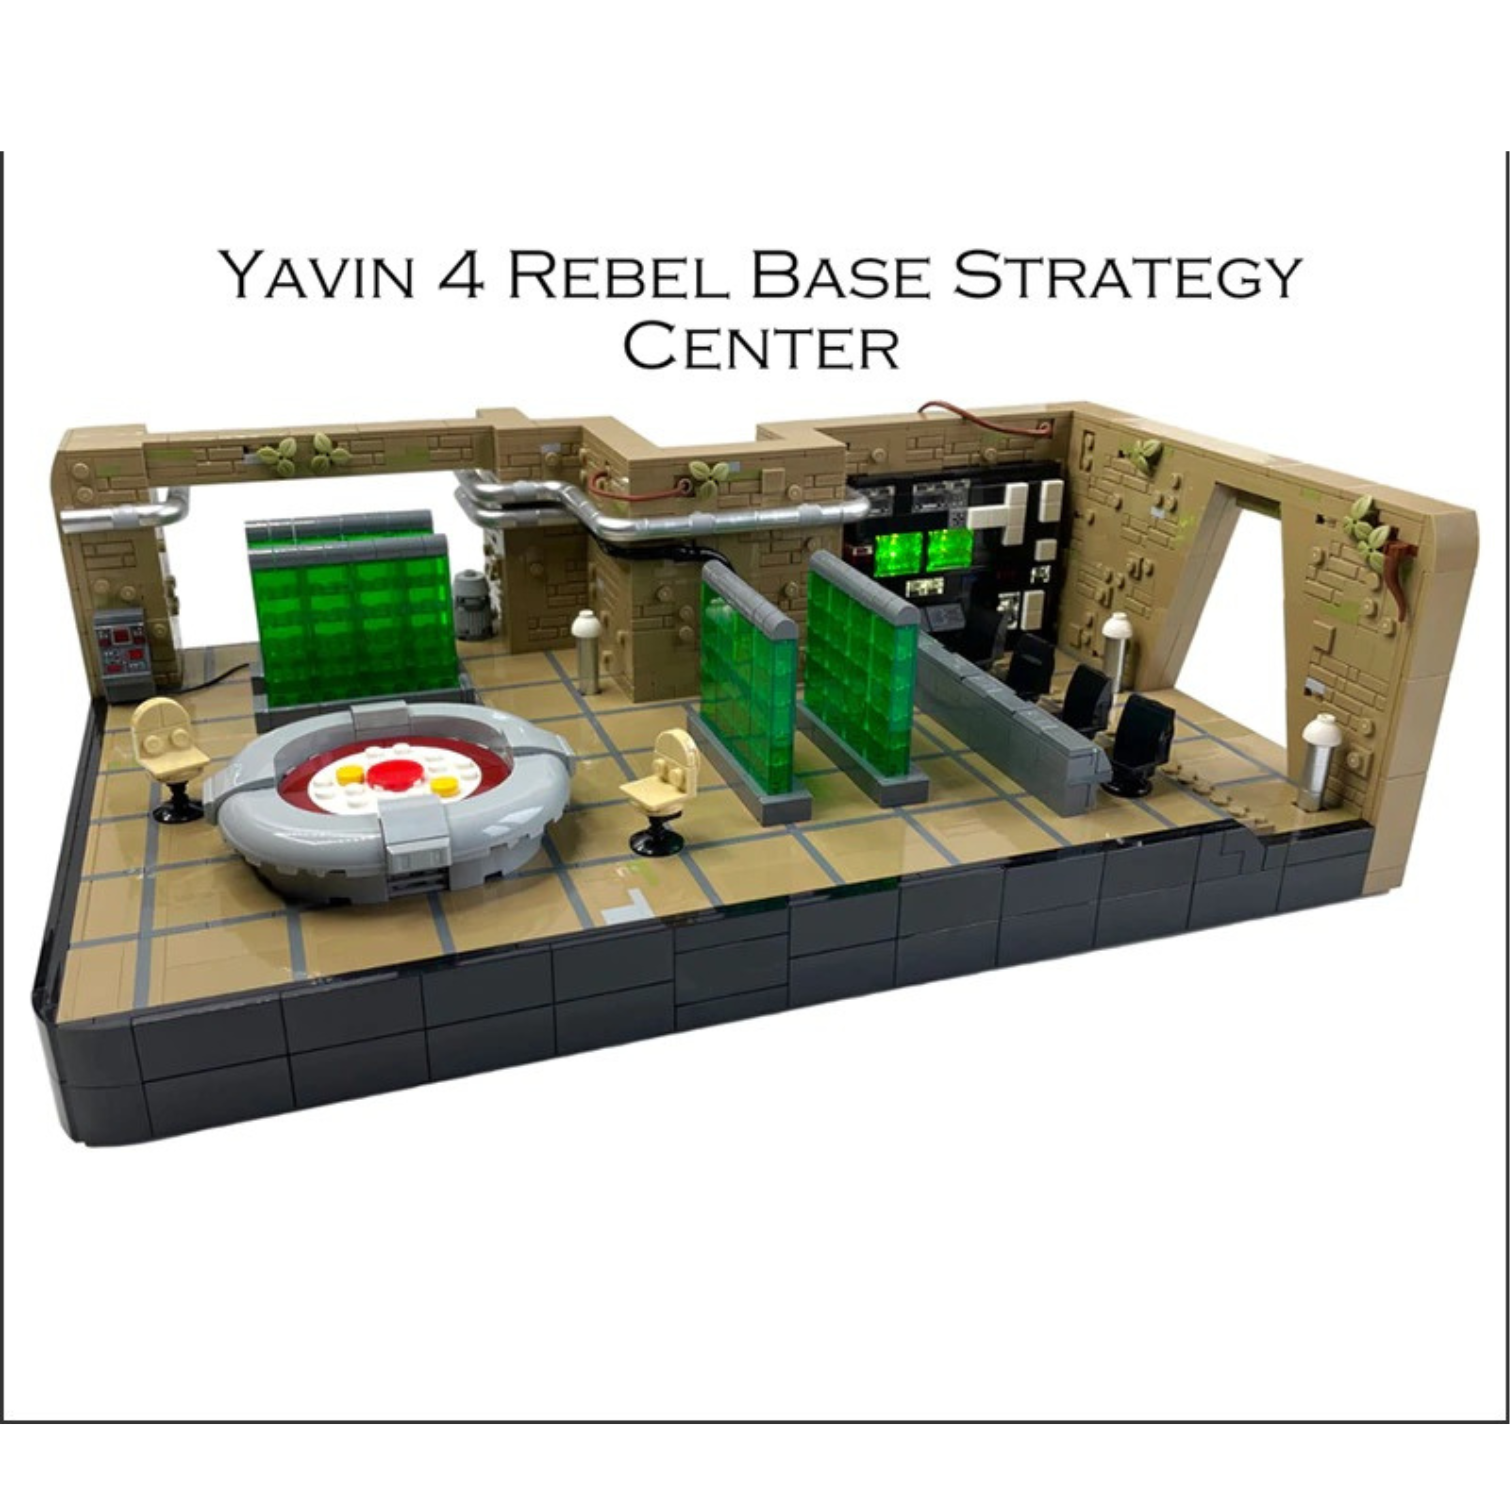 Yavin 4 Rebel Base Strategy Center MOC-76619 Star Wars With 2818 Pieces